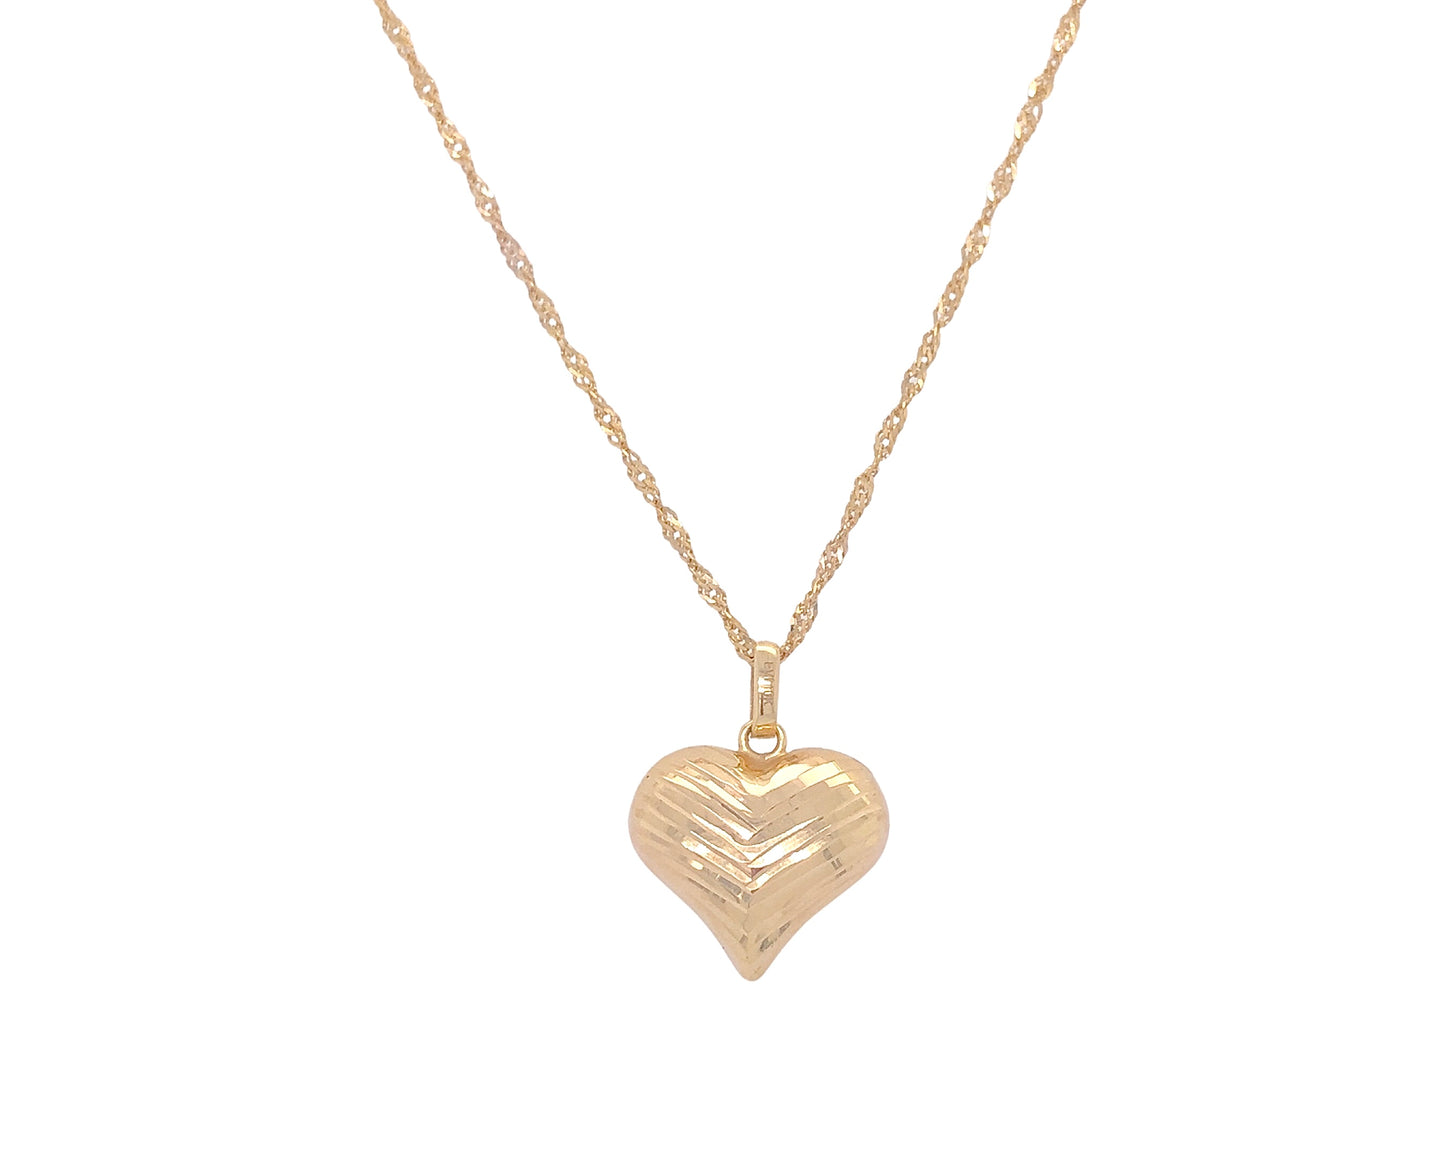 10K Yellow Gold Puff Heart Charm With Chain